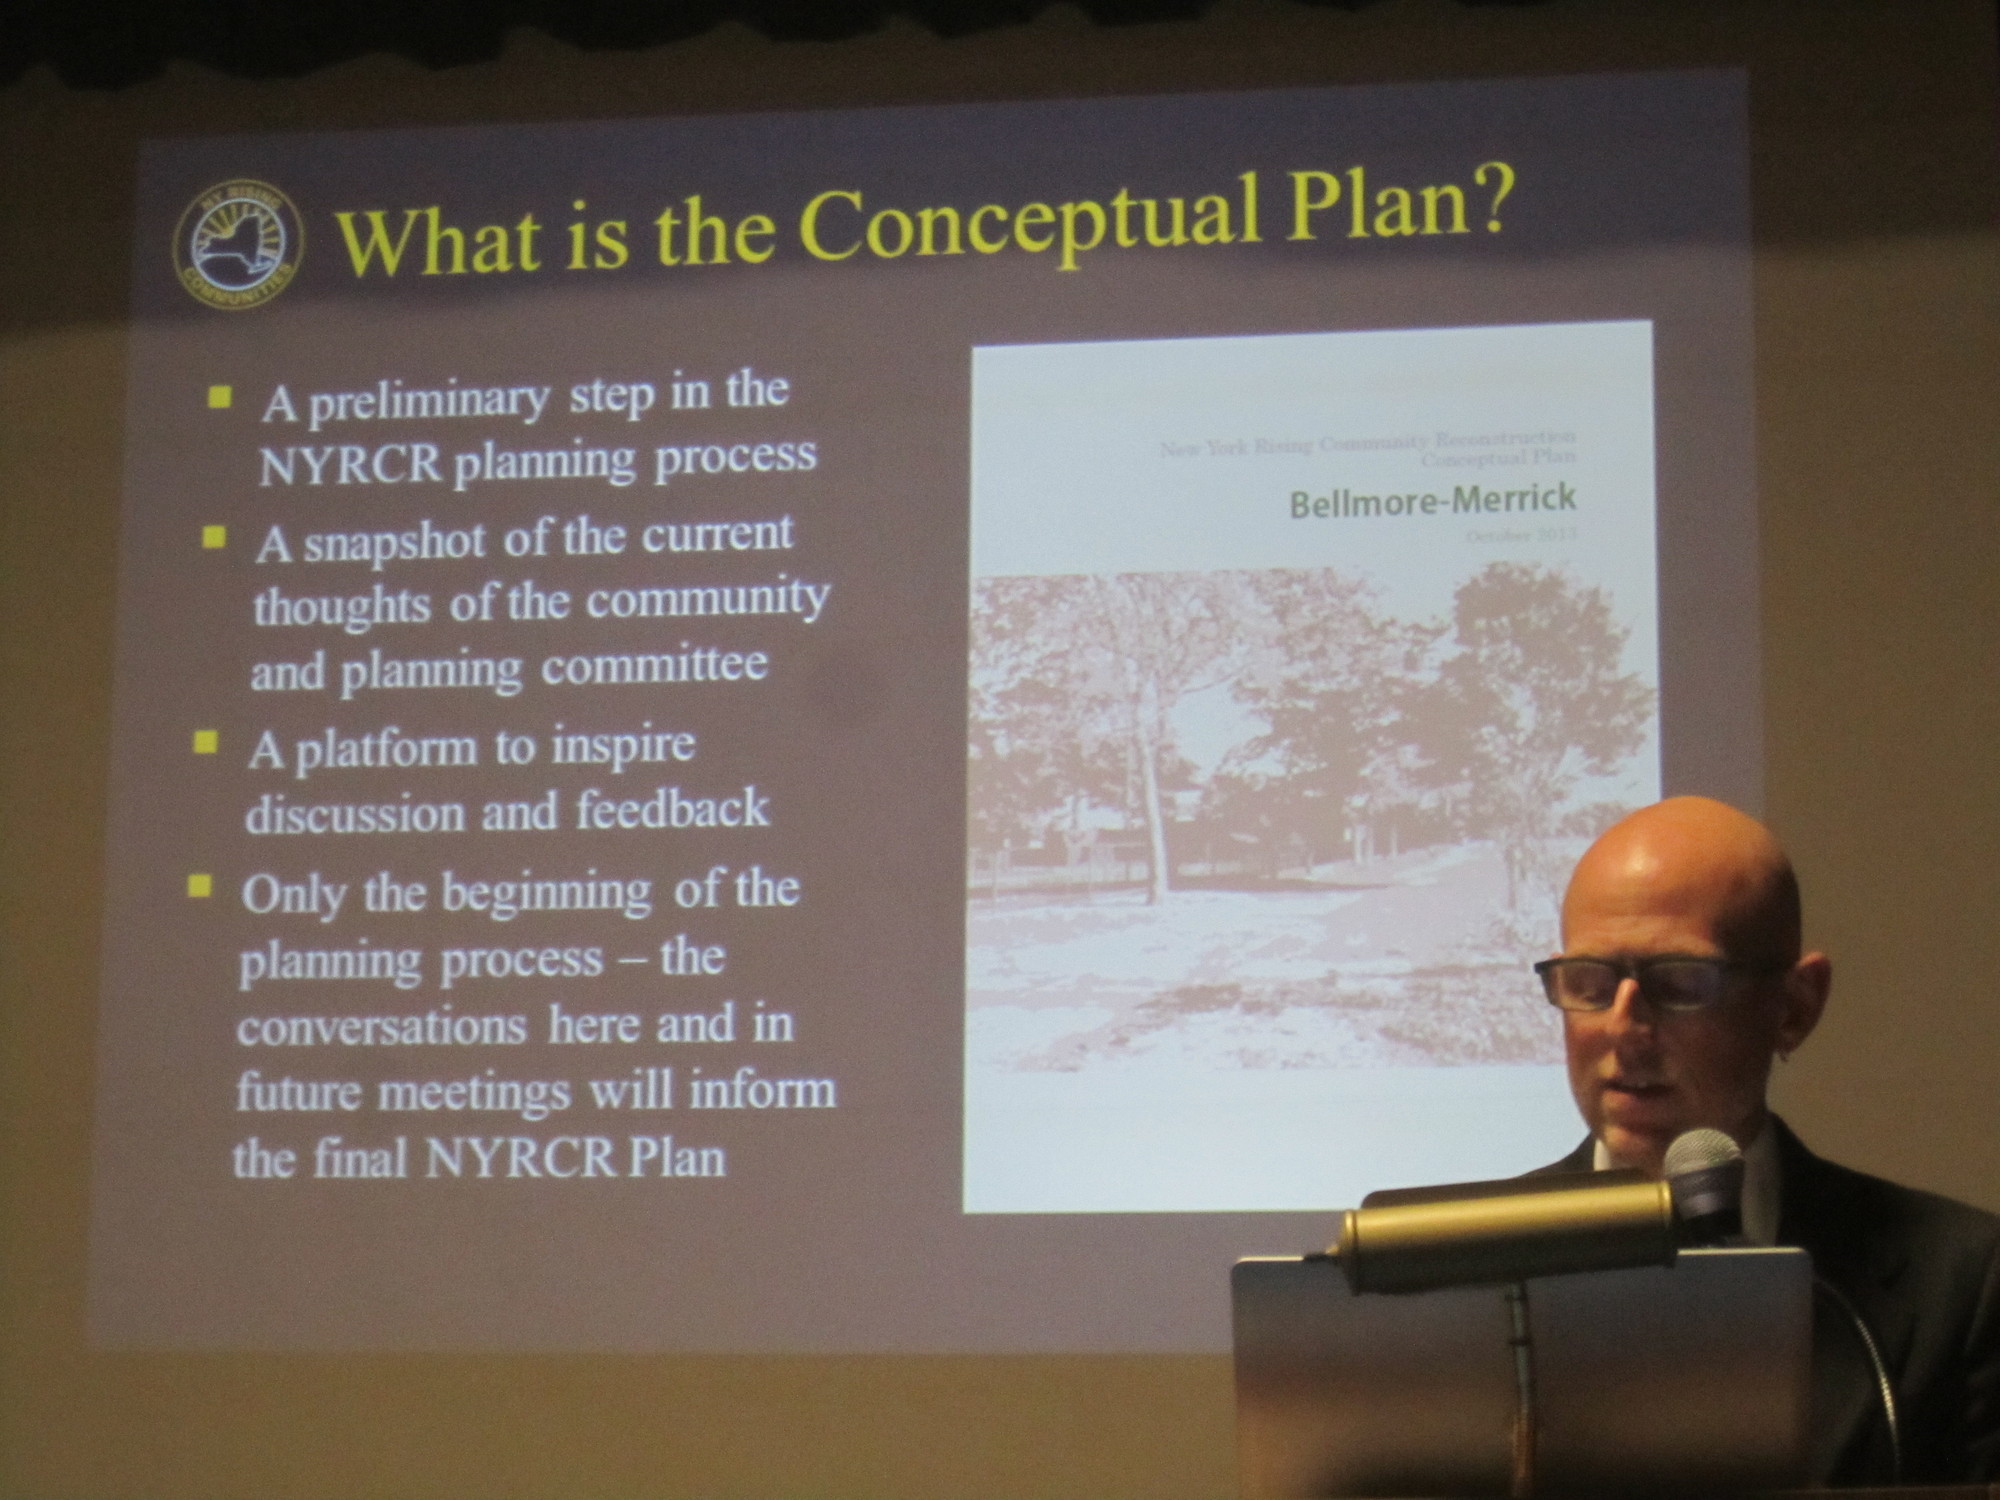 Trent Lethco, a consultant with Ove Arup & Partners, P.C, addressed an earlier meeting of the New York Rising Community Reconstruction Program’s Bellmore-Merrick Planning Committee on Nov. 20, 2013.